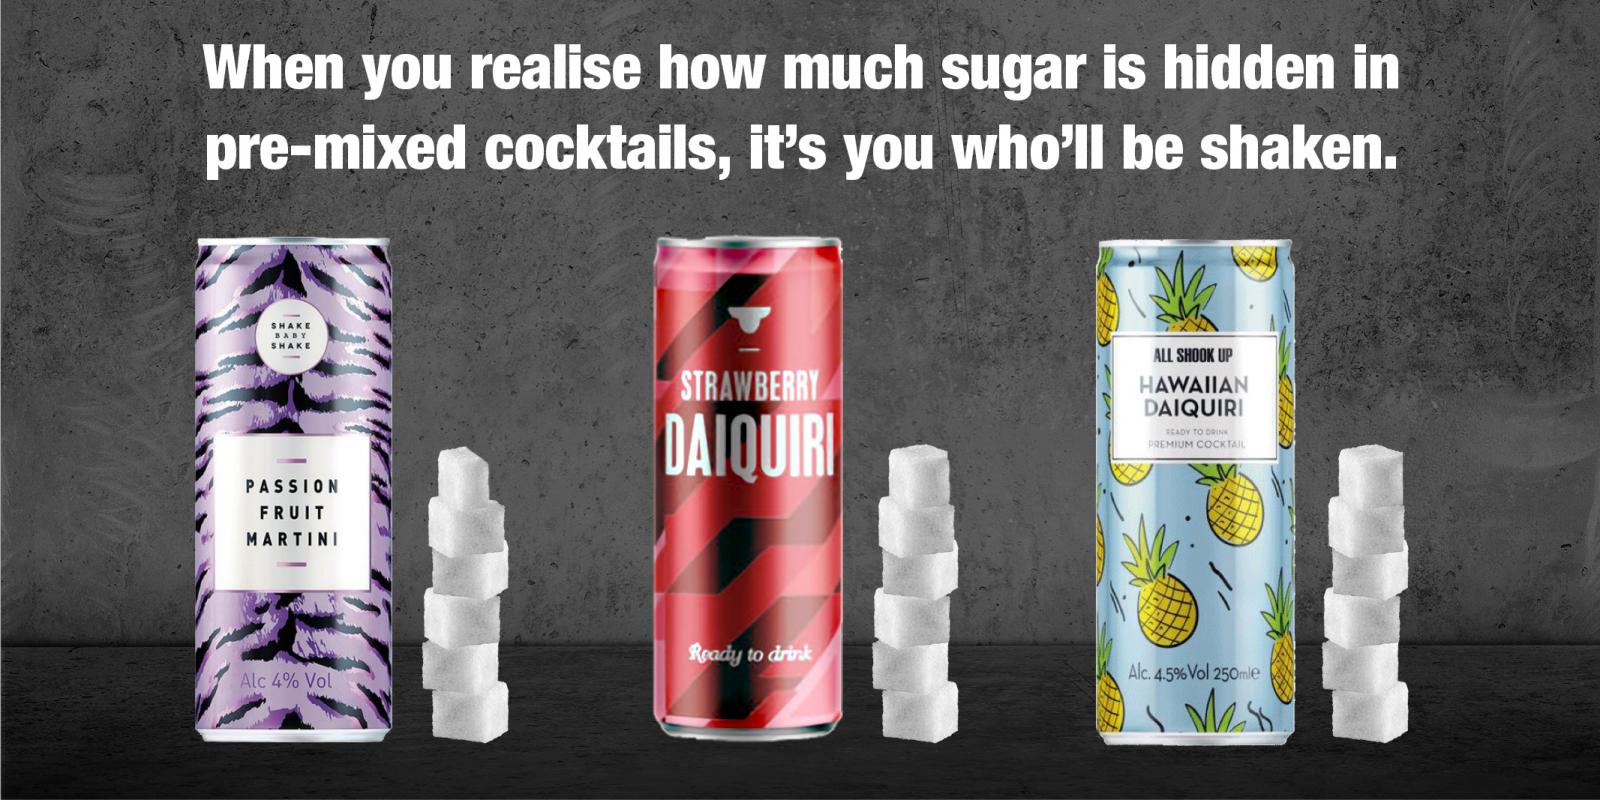 Premixed alcohol drinks can contain nine teaspoons of sugar